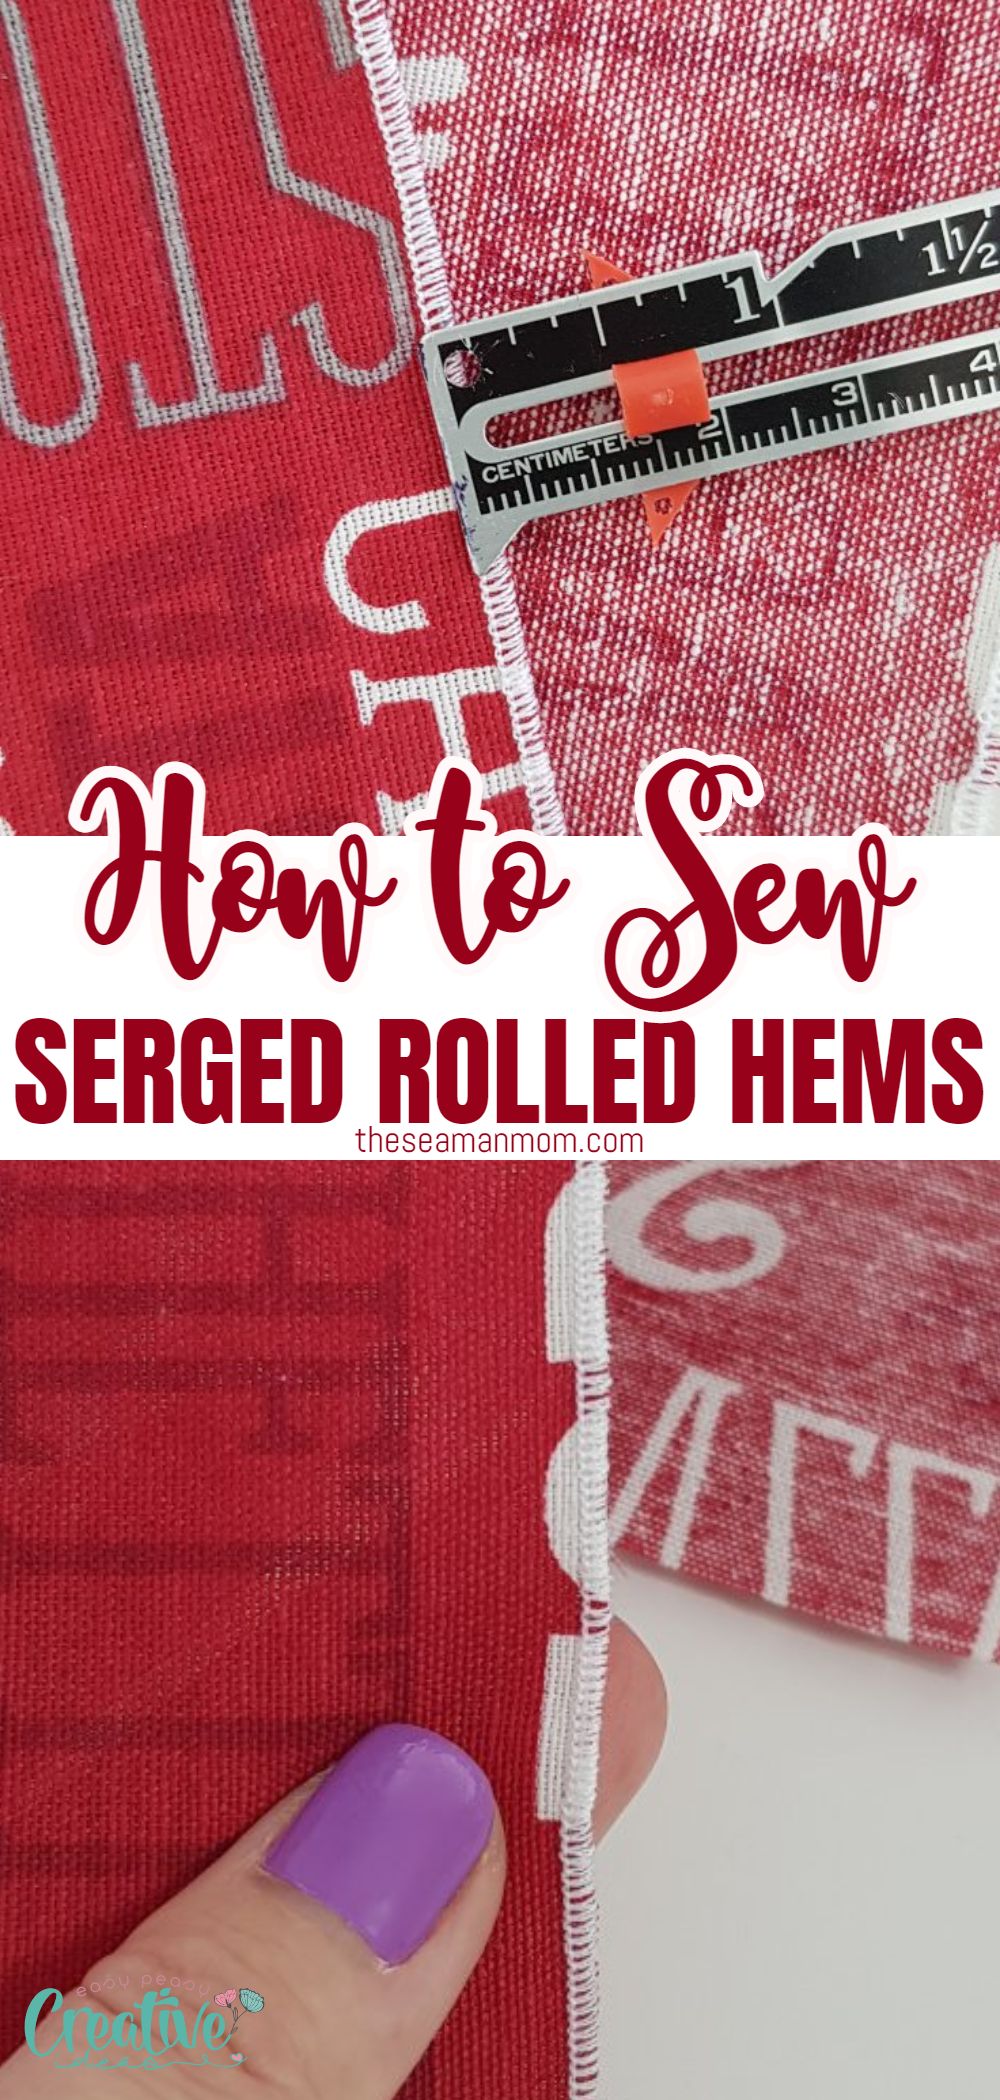 Did you know you can use your serger to sew both narrow and rolled hems? You may find that serging a rolled hem is actually a lot easier than the classic rolled hem method! In this tutorial you'll learn how to sew a quick and beautiful serged rolled hem on your overlock machine! via @petroneagu